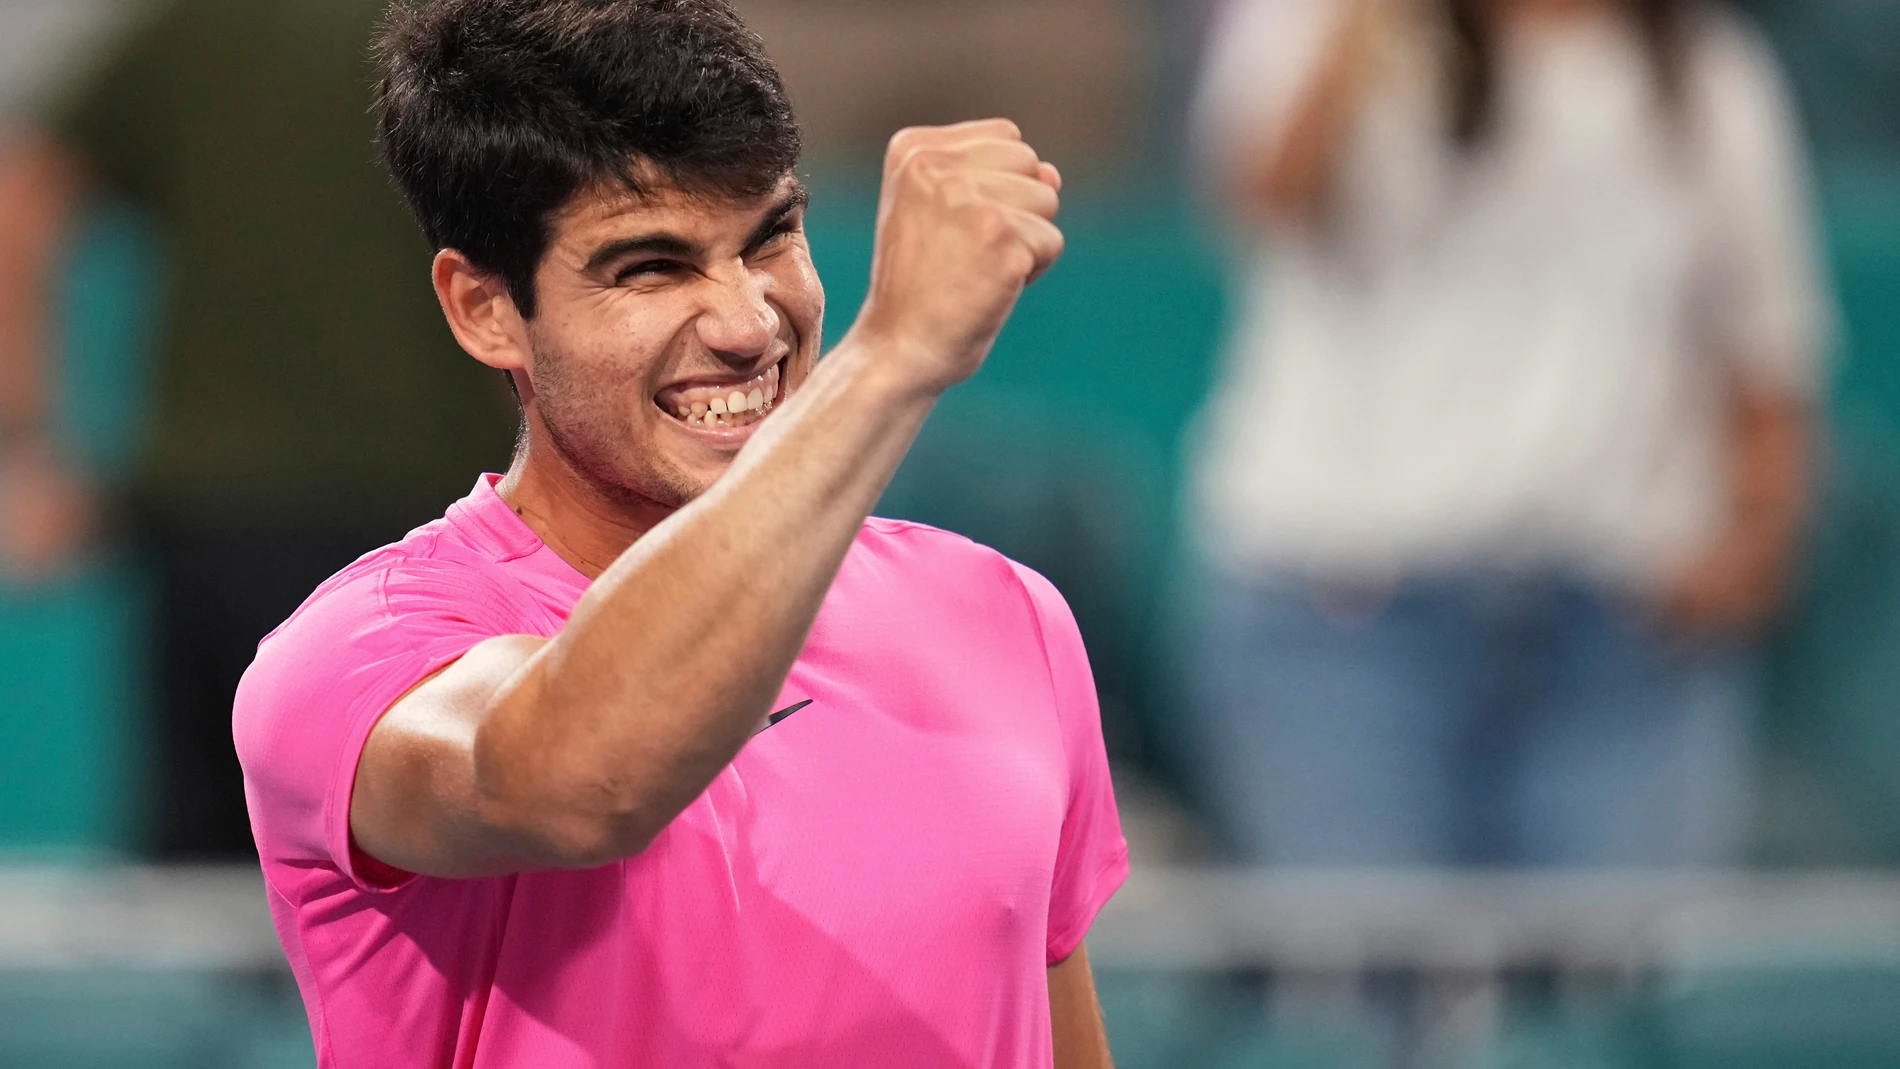 Carlos Alcaraz, of Spain, clenches his fist after defeating Taylor Fritz, of the United States, at the Miami Open tennis tournament Thursday, March 30, 2023, in Miami Gardens, Fla. (AP Photo/Jim Rassol)